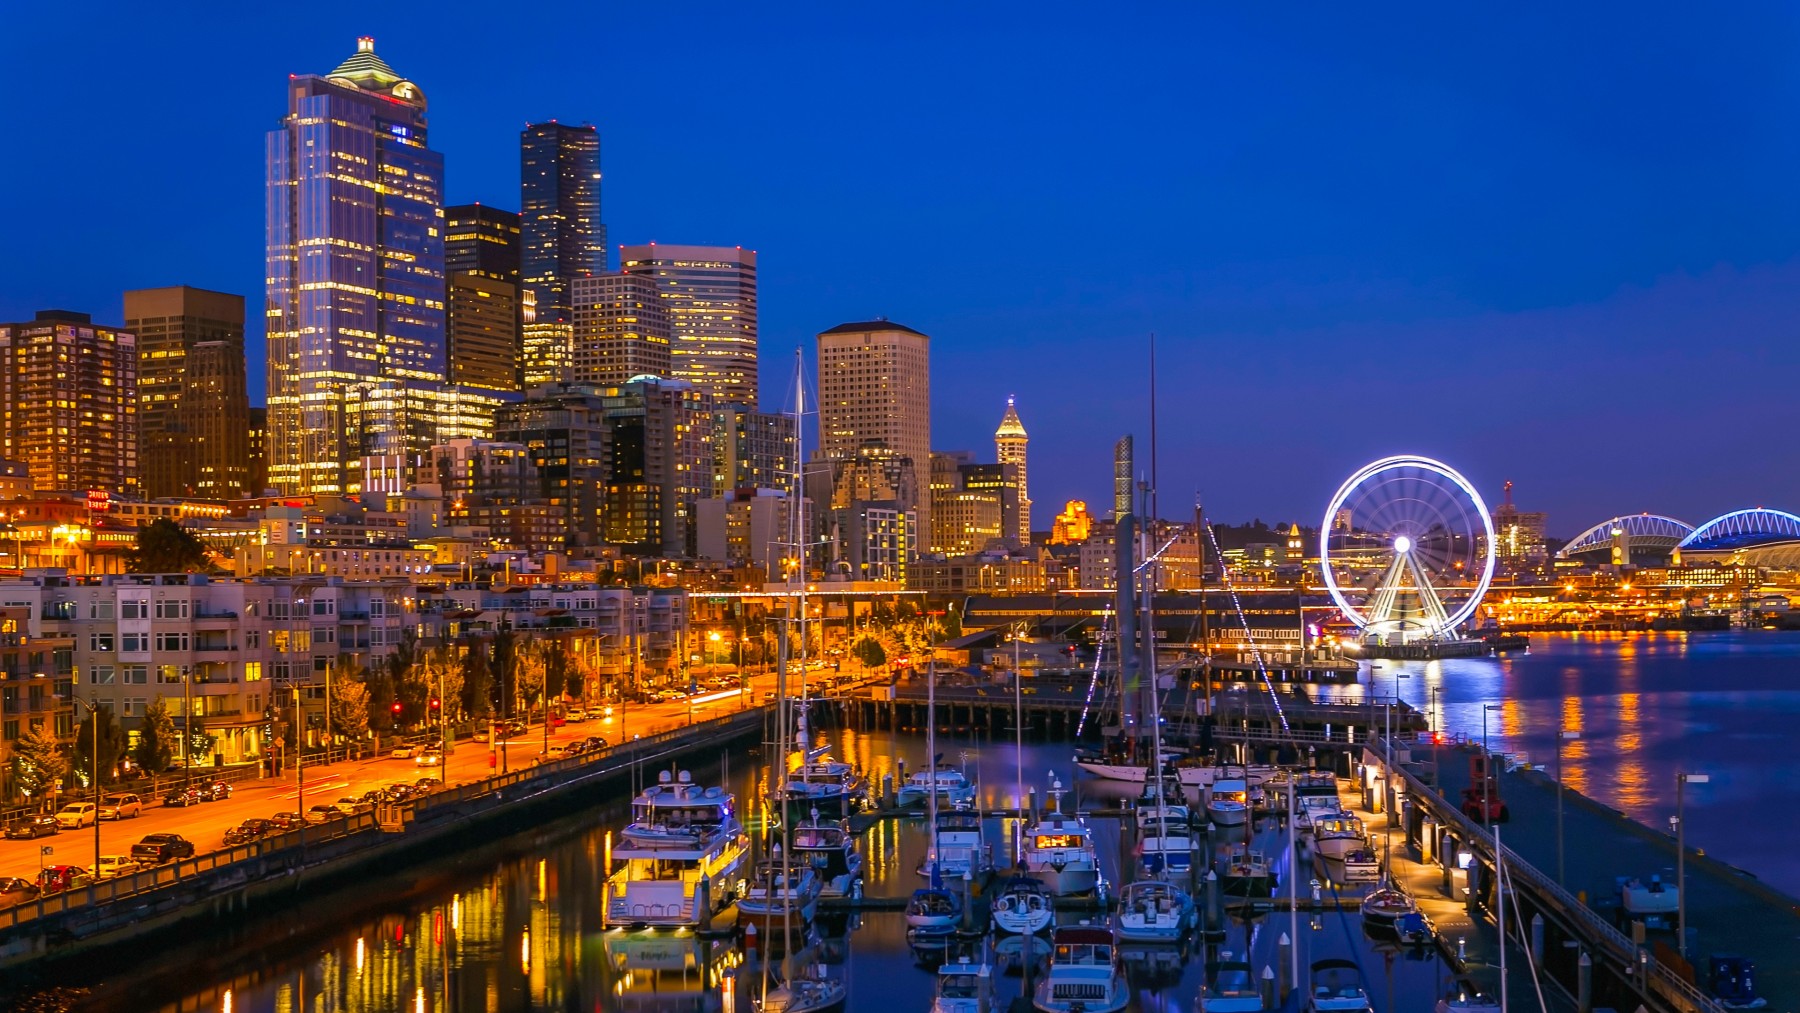 After sunset in downtown Seattle tourist area and marina